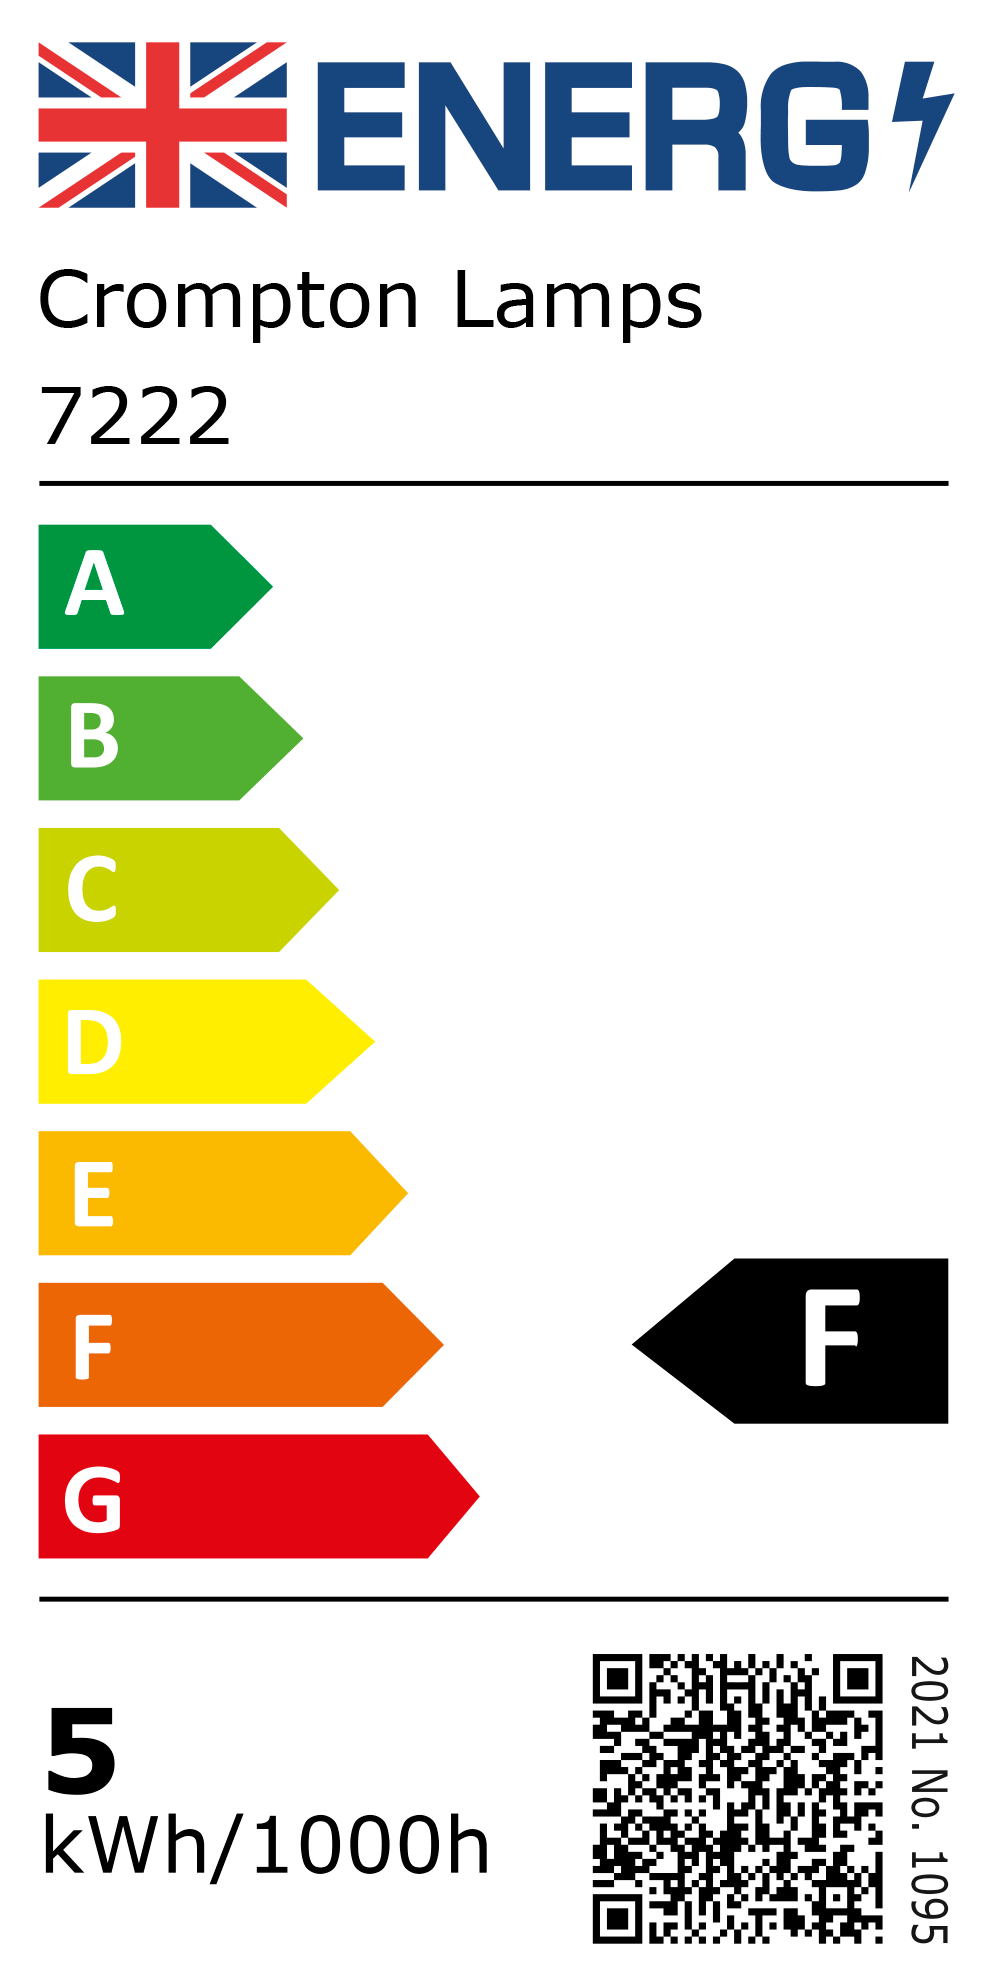 New 2021 Energy Rating Label: MPN 7222